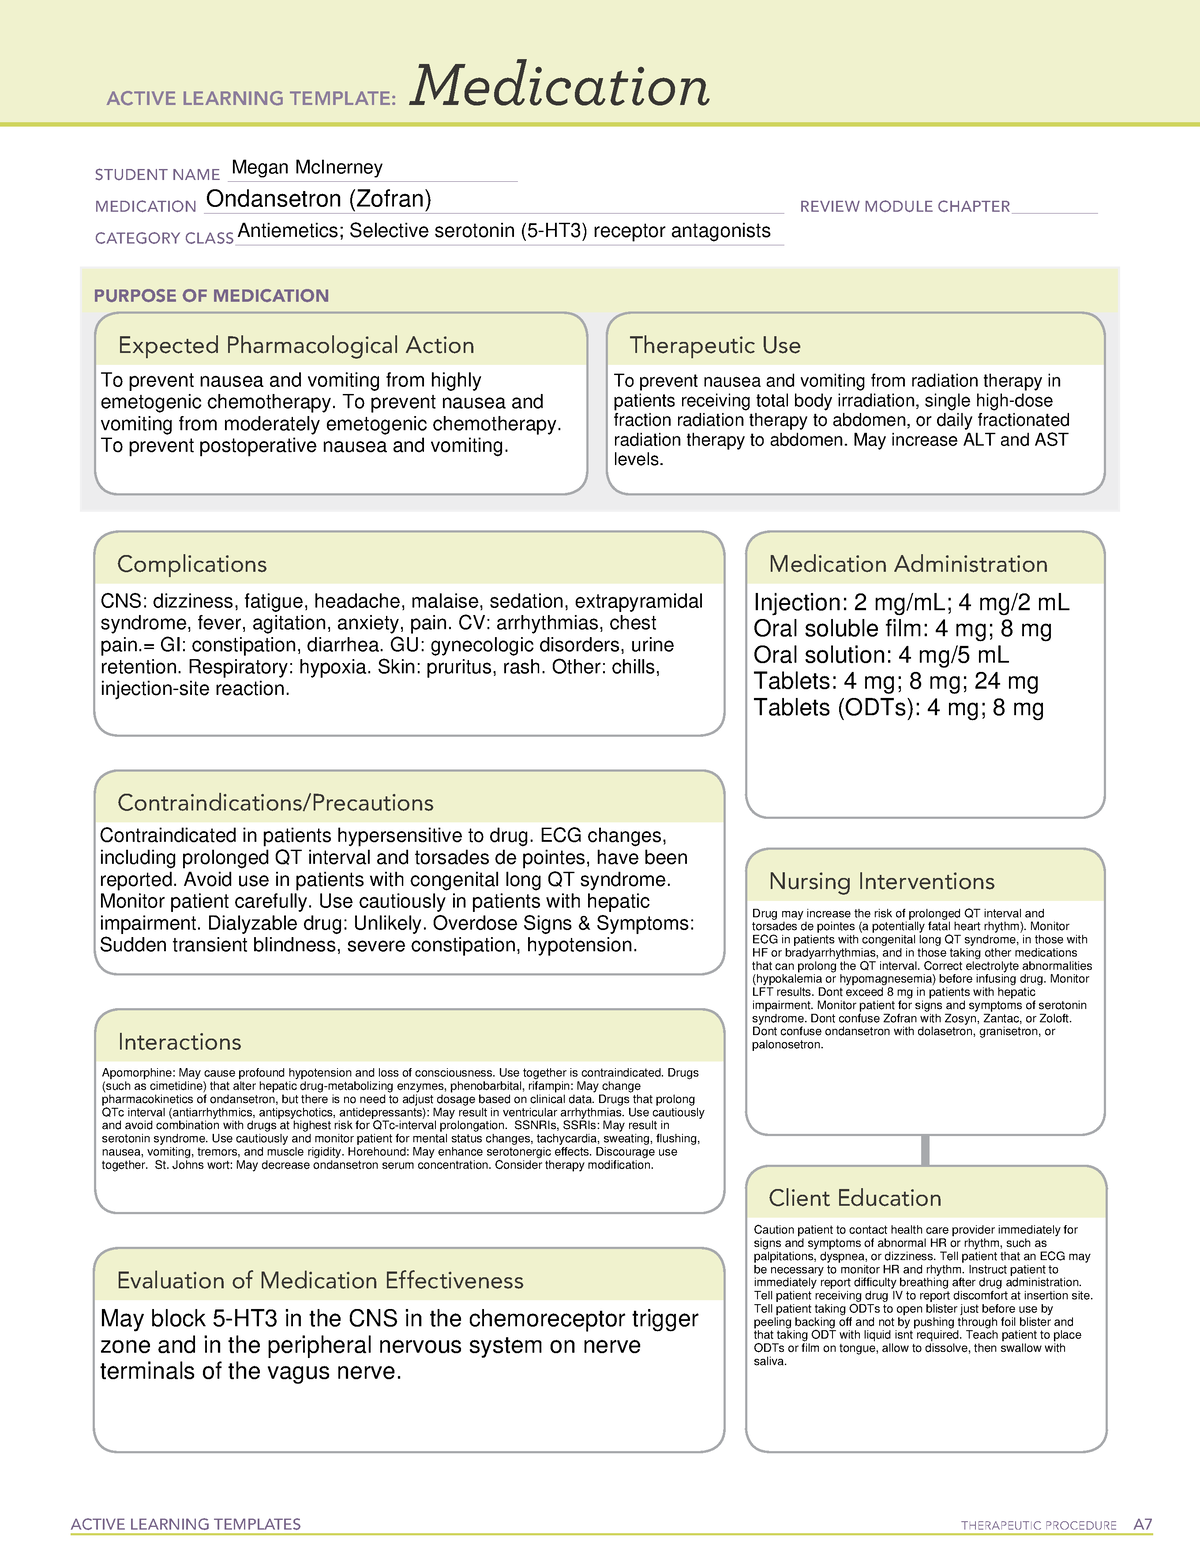 Ondansetron medication ACTIVE LEARNING TEMPLATES THERAPEUTIC